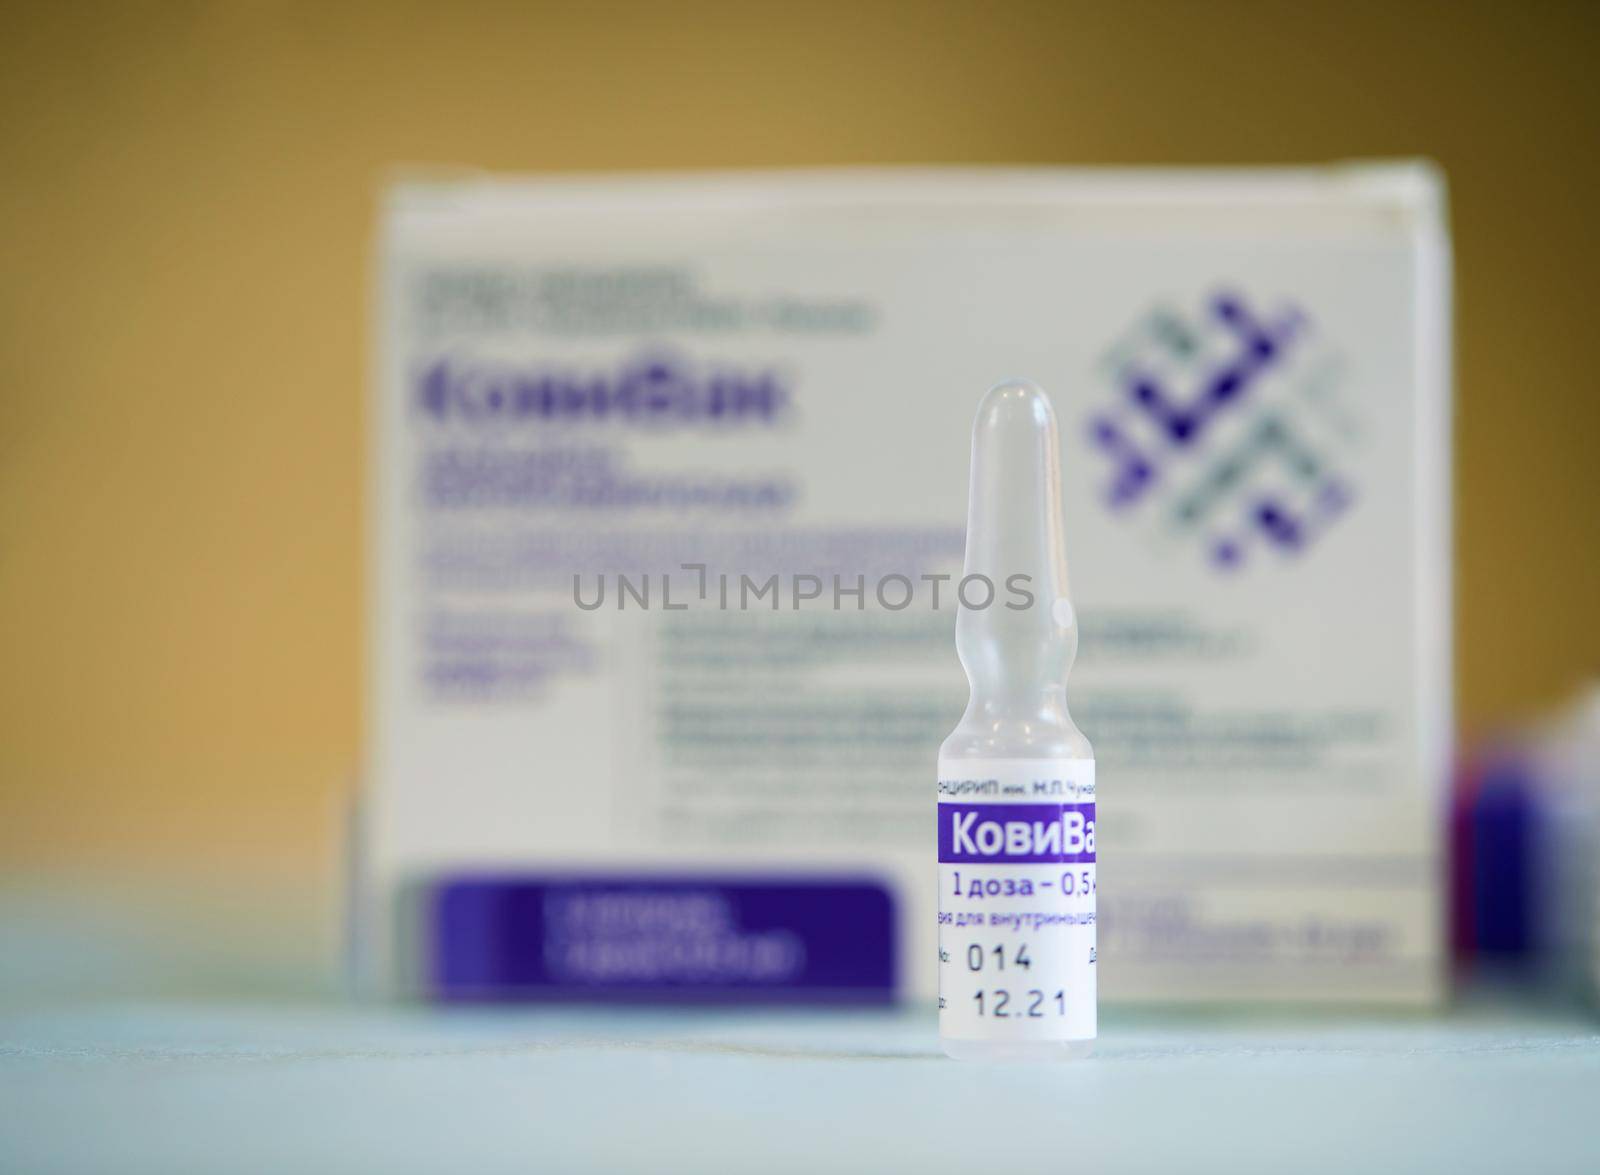 Box and ampoules with new Russian vaccine against coronavirus SARS-CoV-2, CoviVac. CoviVac is developed by the Chumakov Centre. Vaccine for prevention COVID-19. 26.08.2021, Moscow, Russia by EvgeniyQW